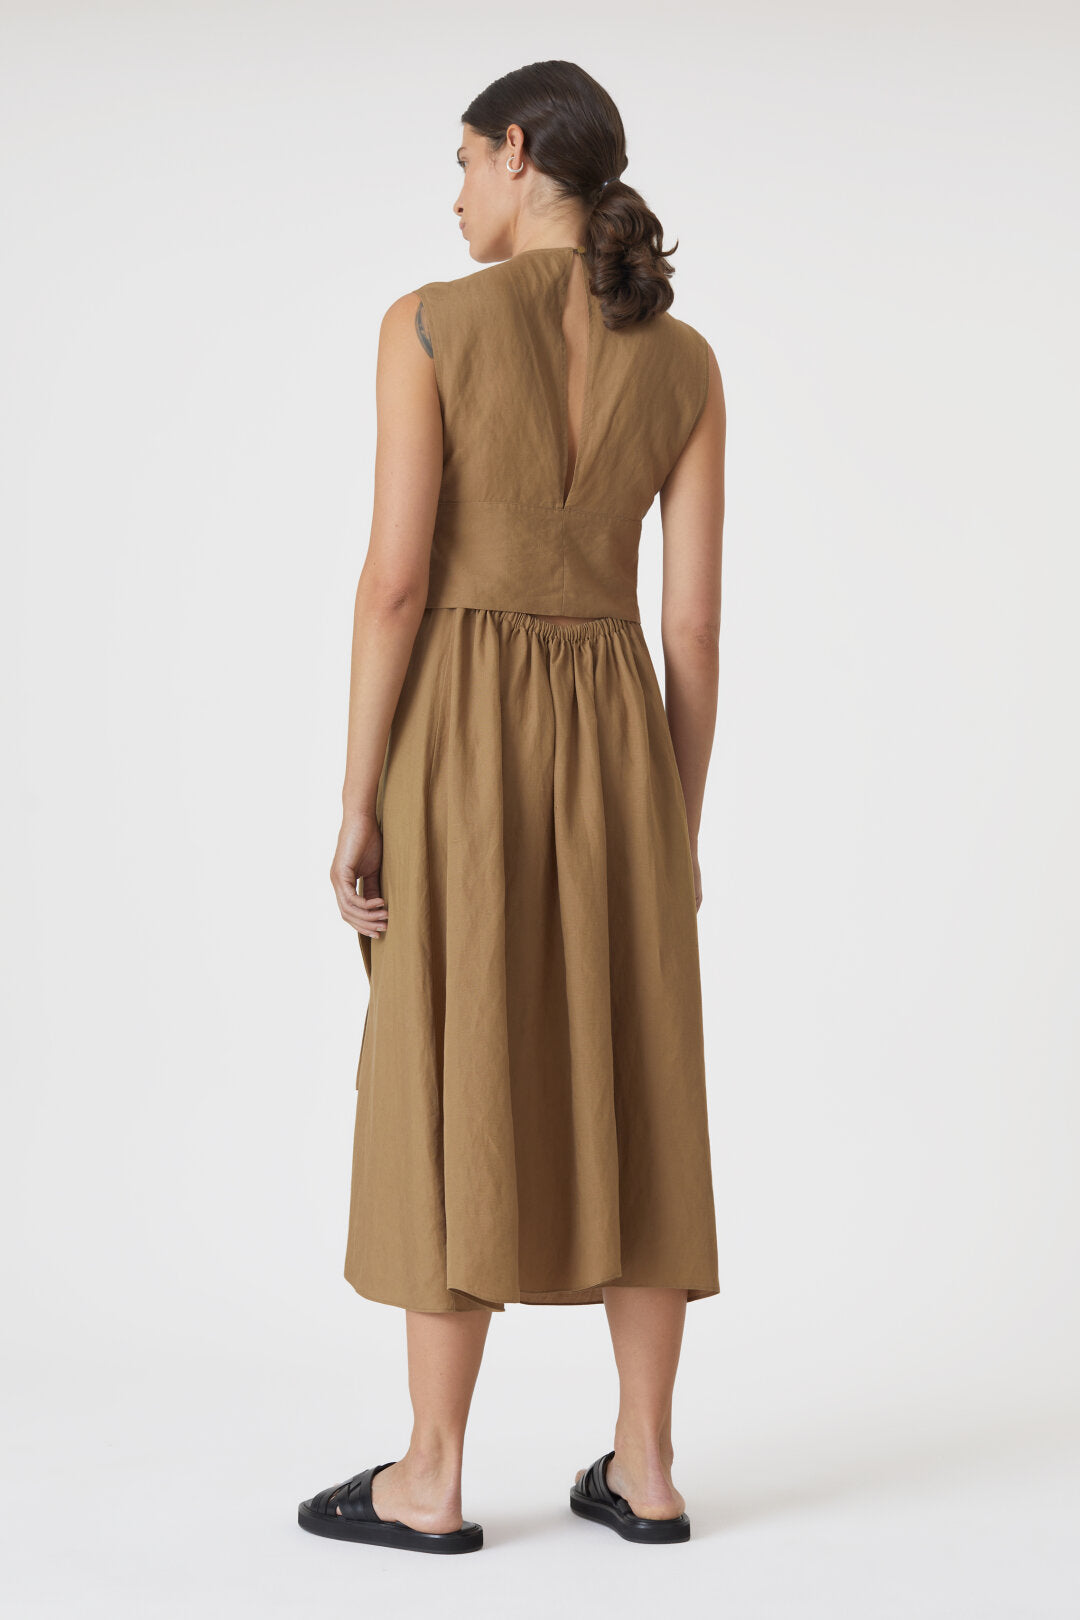 CLOSED WOMENS WAISTED DRESS WITH BELT - 2 COLORS